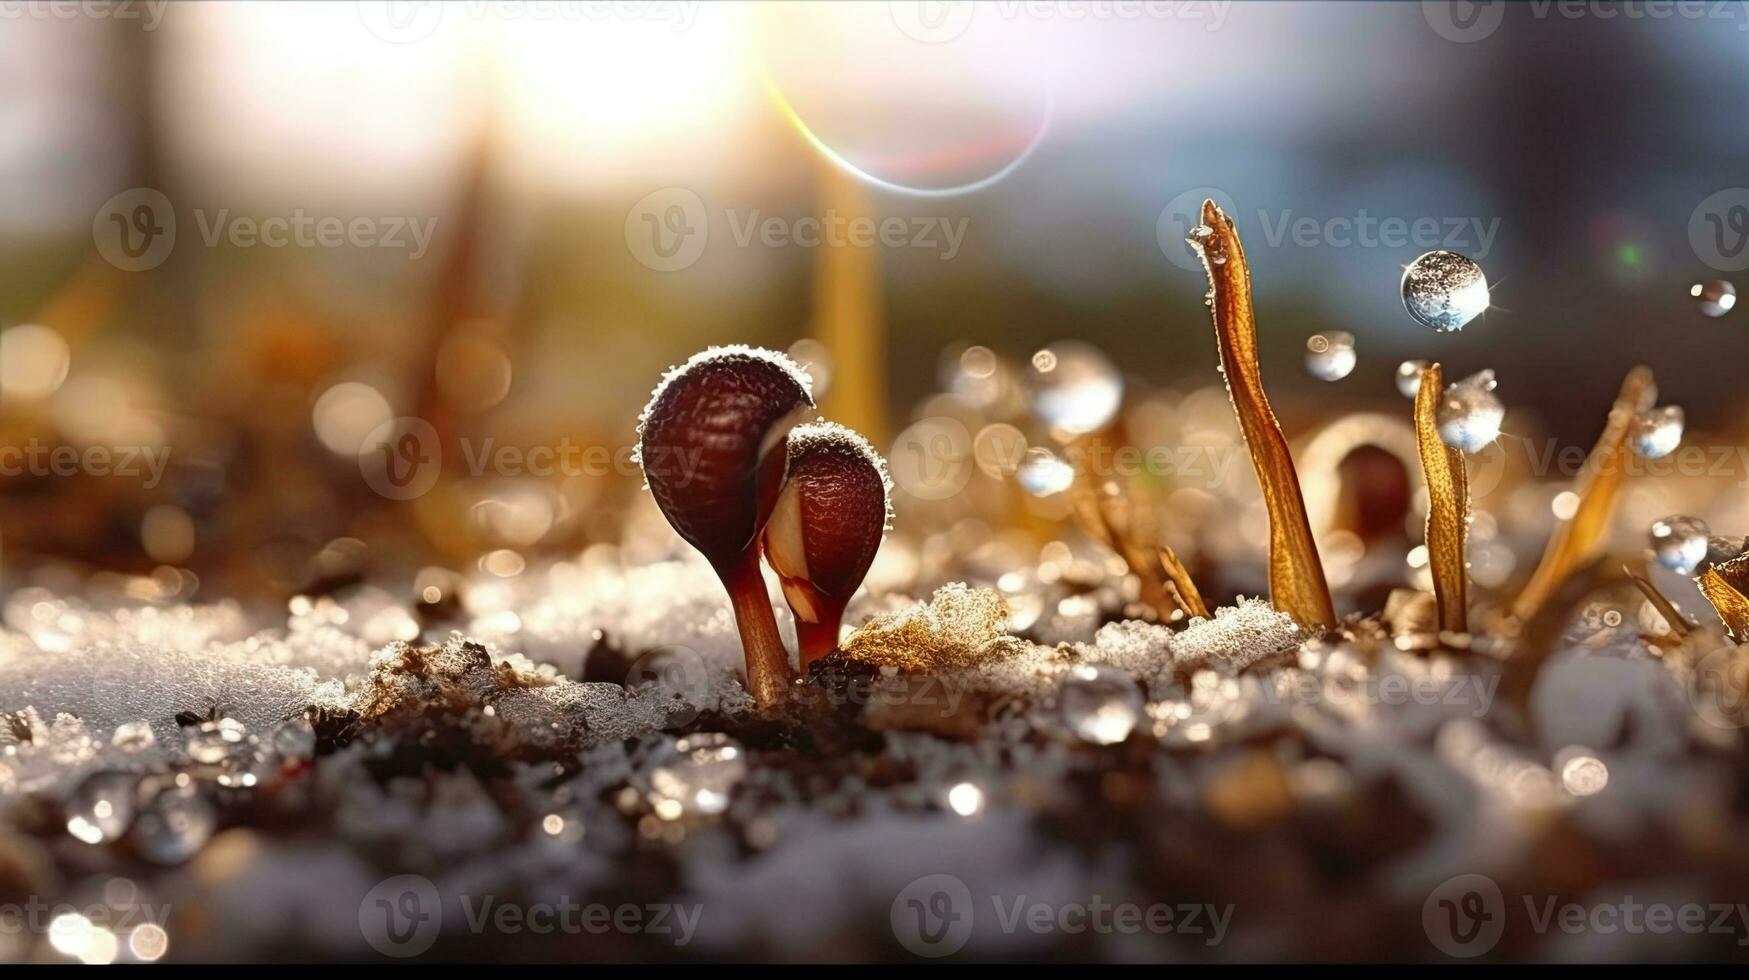 Germinating Seeds of Vegetable on the Earth under snow in winter, AI Generated photo